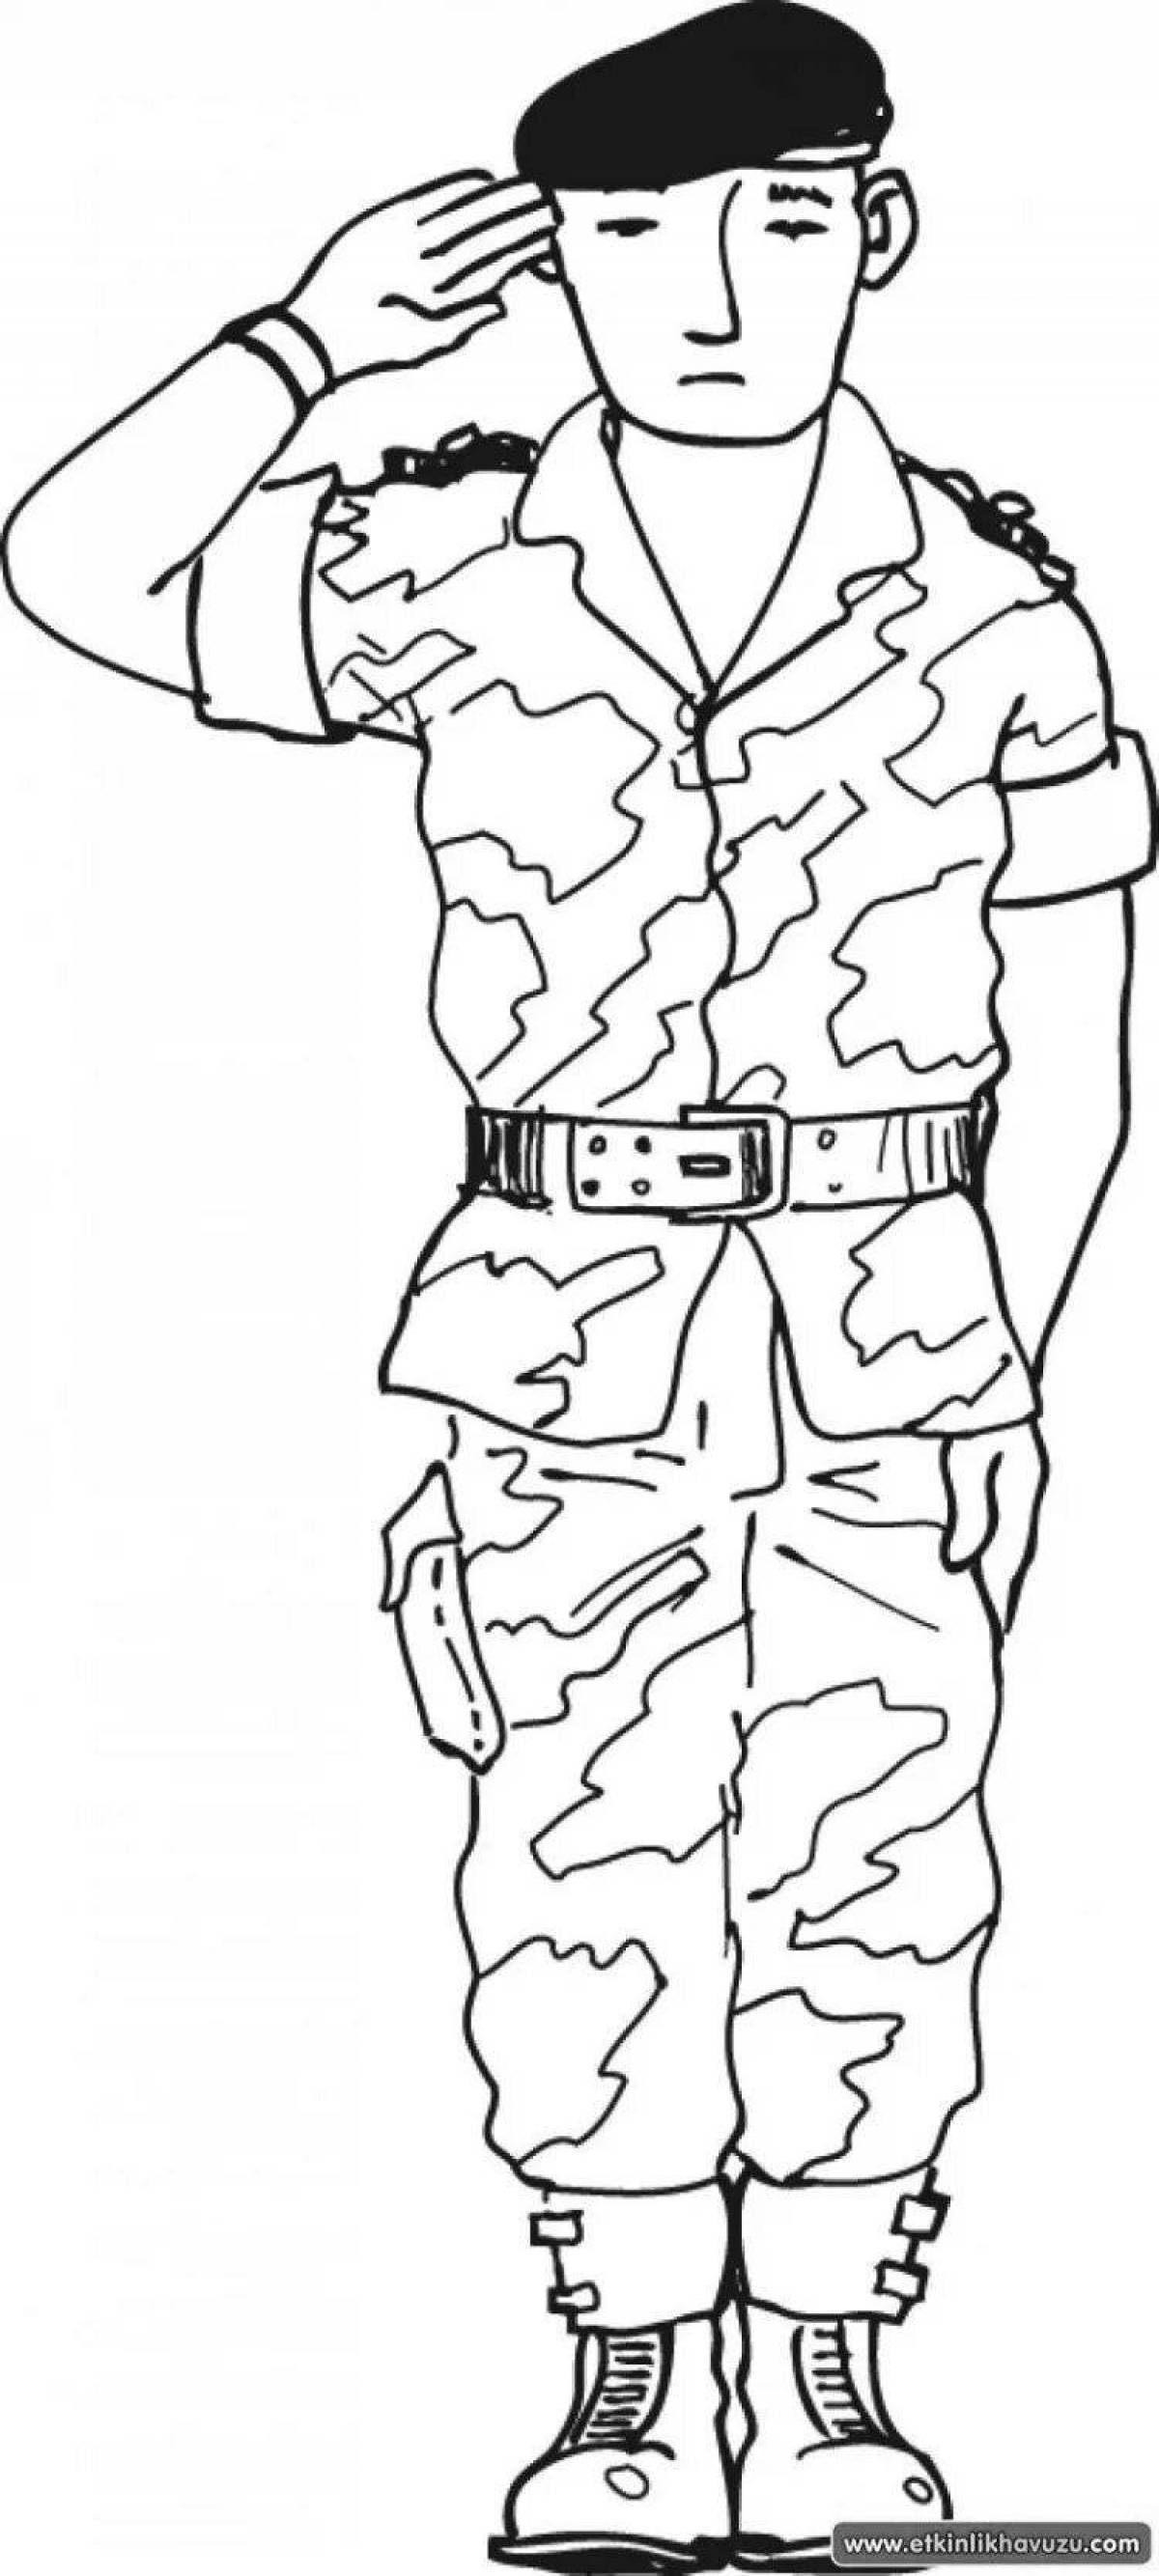 Great russian soldier coloring pages for kids